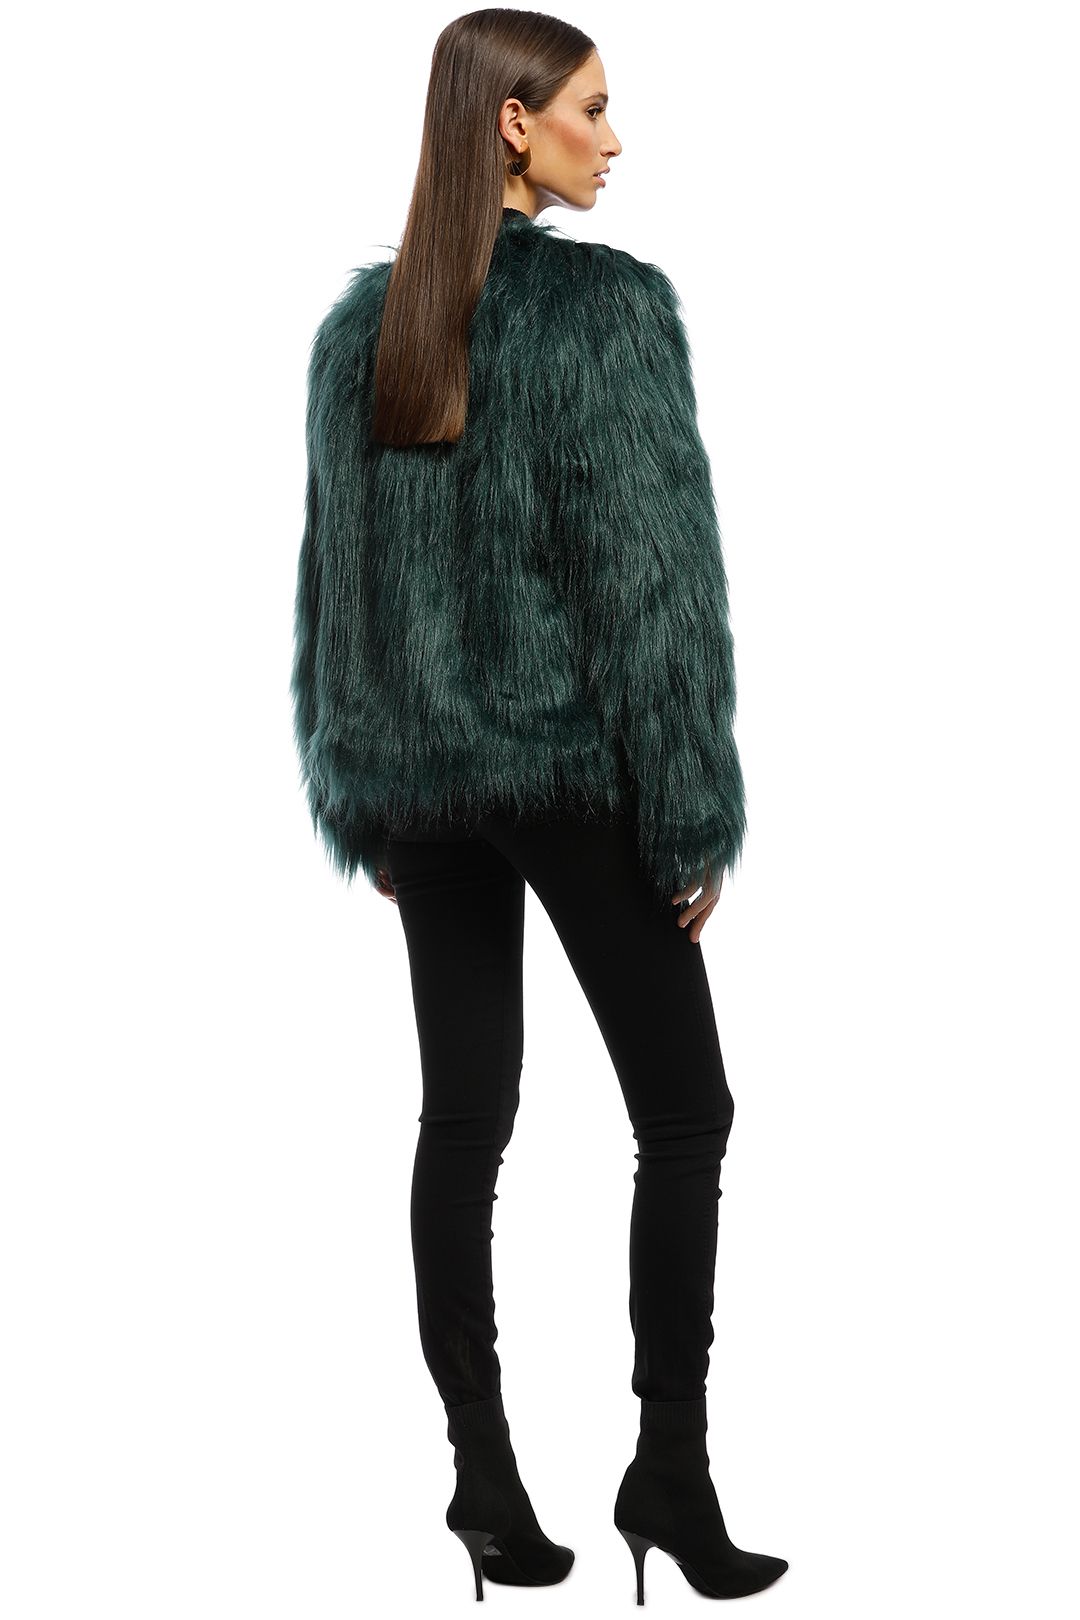 Everly - Marmont Faux Fur Jacket - Forest Green - Back